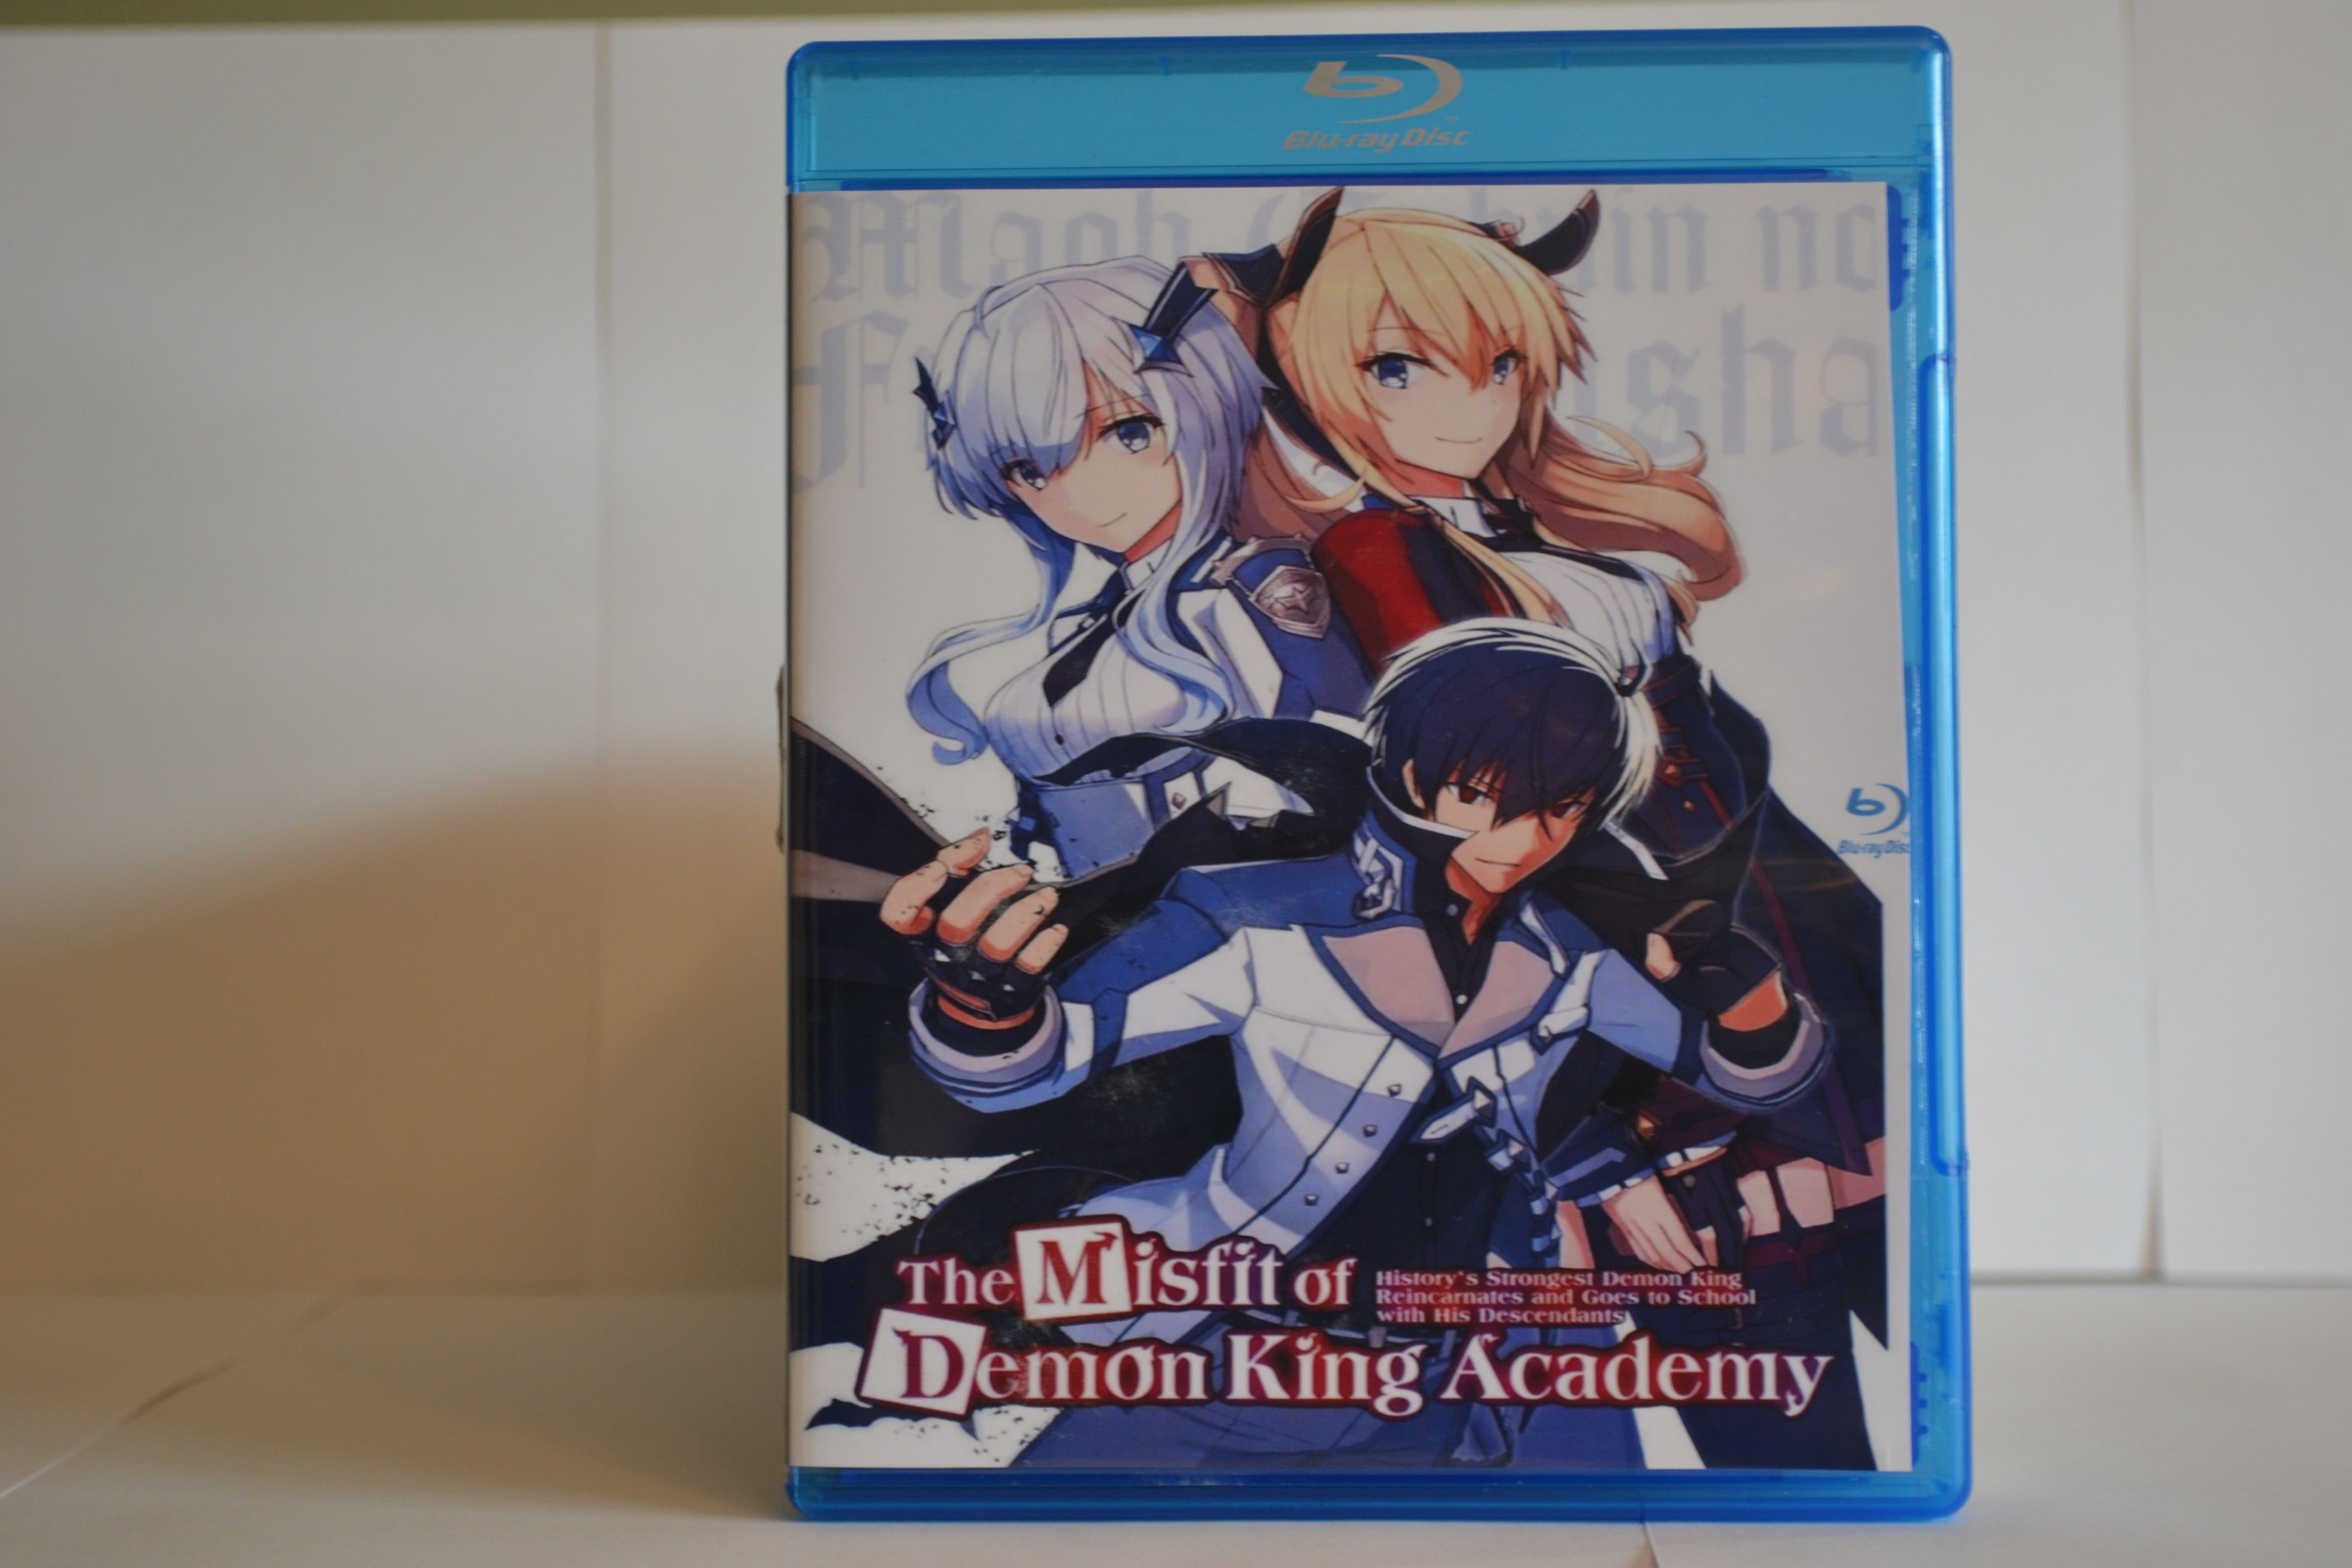 The Misfit Of Demon King Academy The Complete Series Blu-ray Set